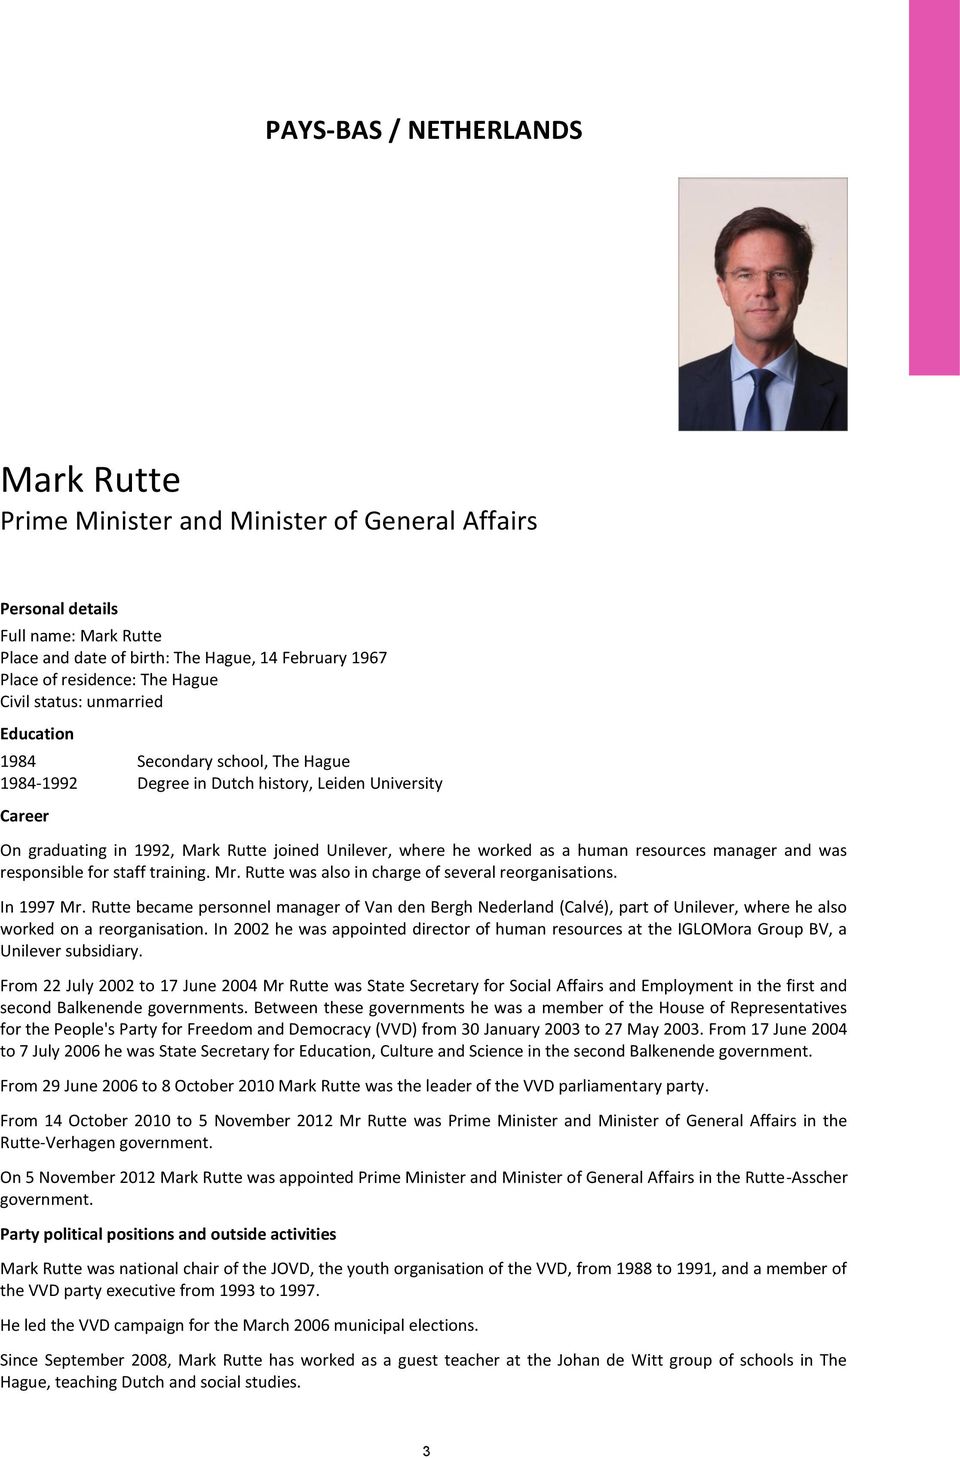 as a human resources manager and was responsible for staff training. Mr. Rutte was also in charge of several reorganisations. In 1997 Mr.